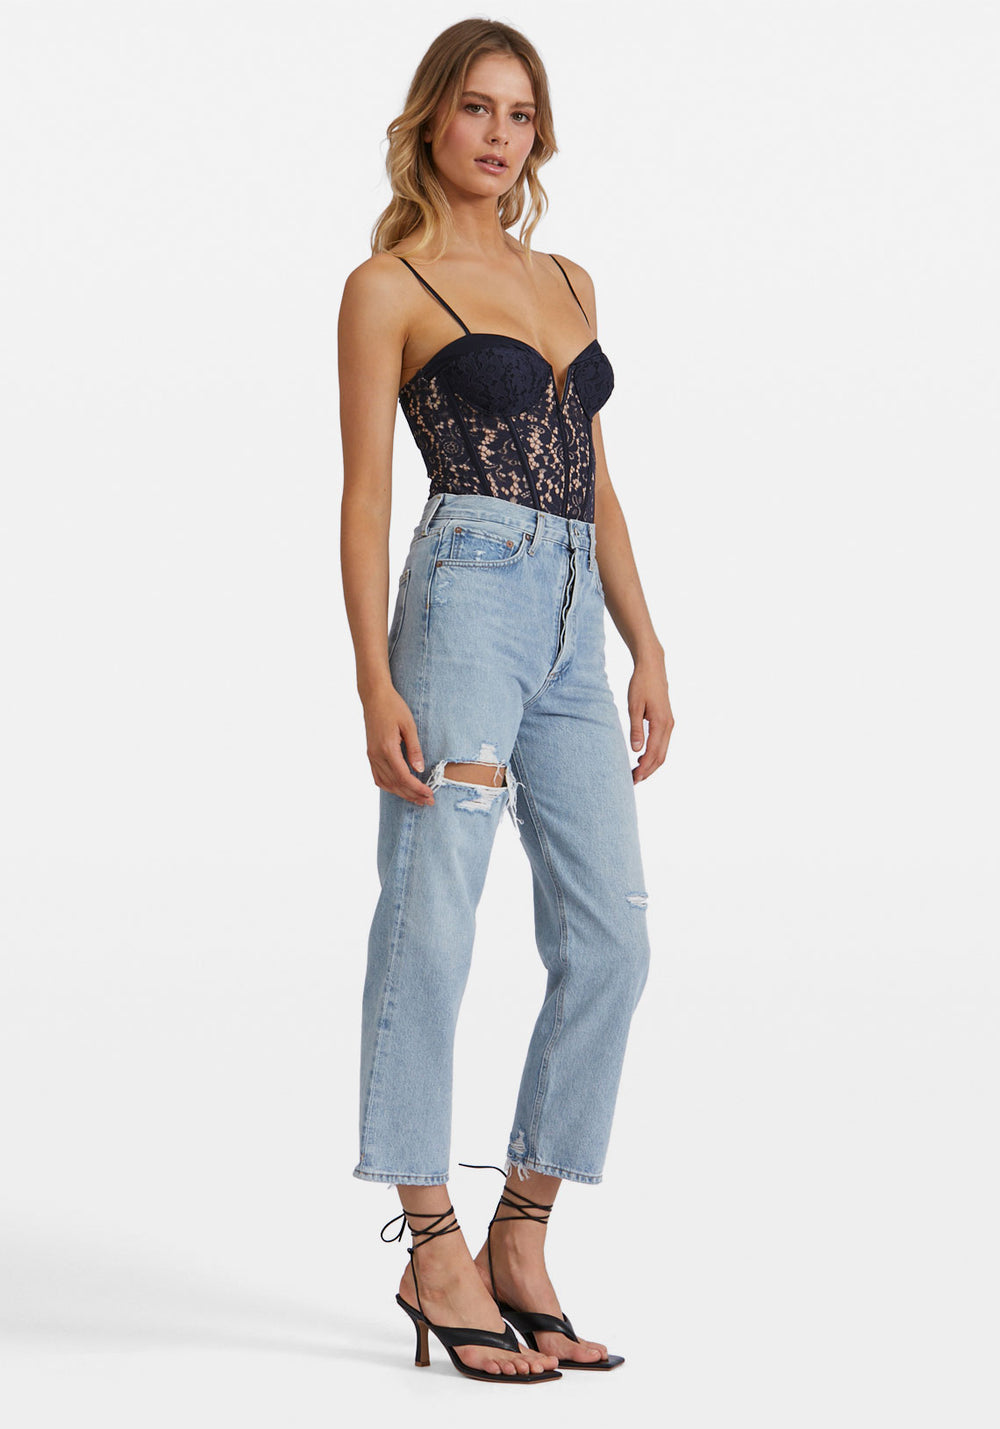 Anne Corded Lace Bodysuit Navy, Cami NYC